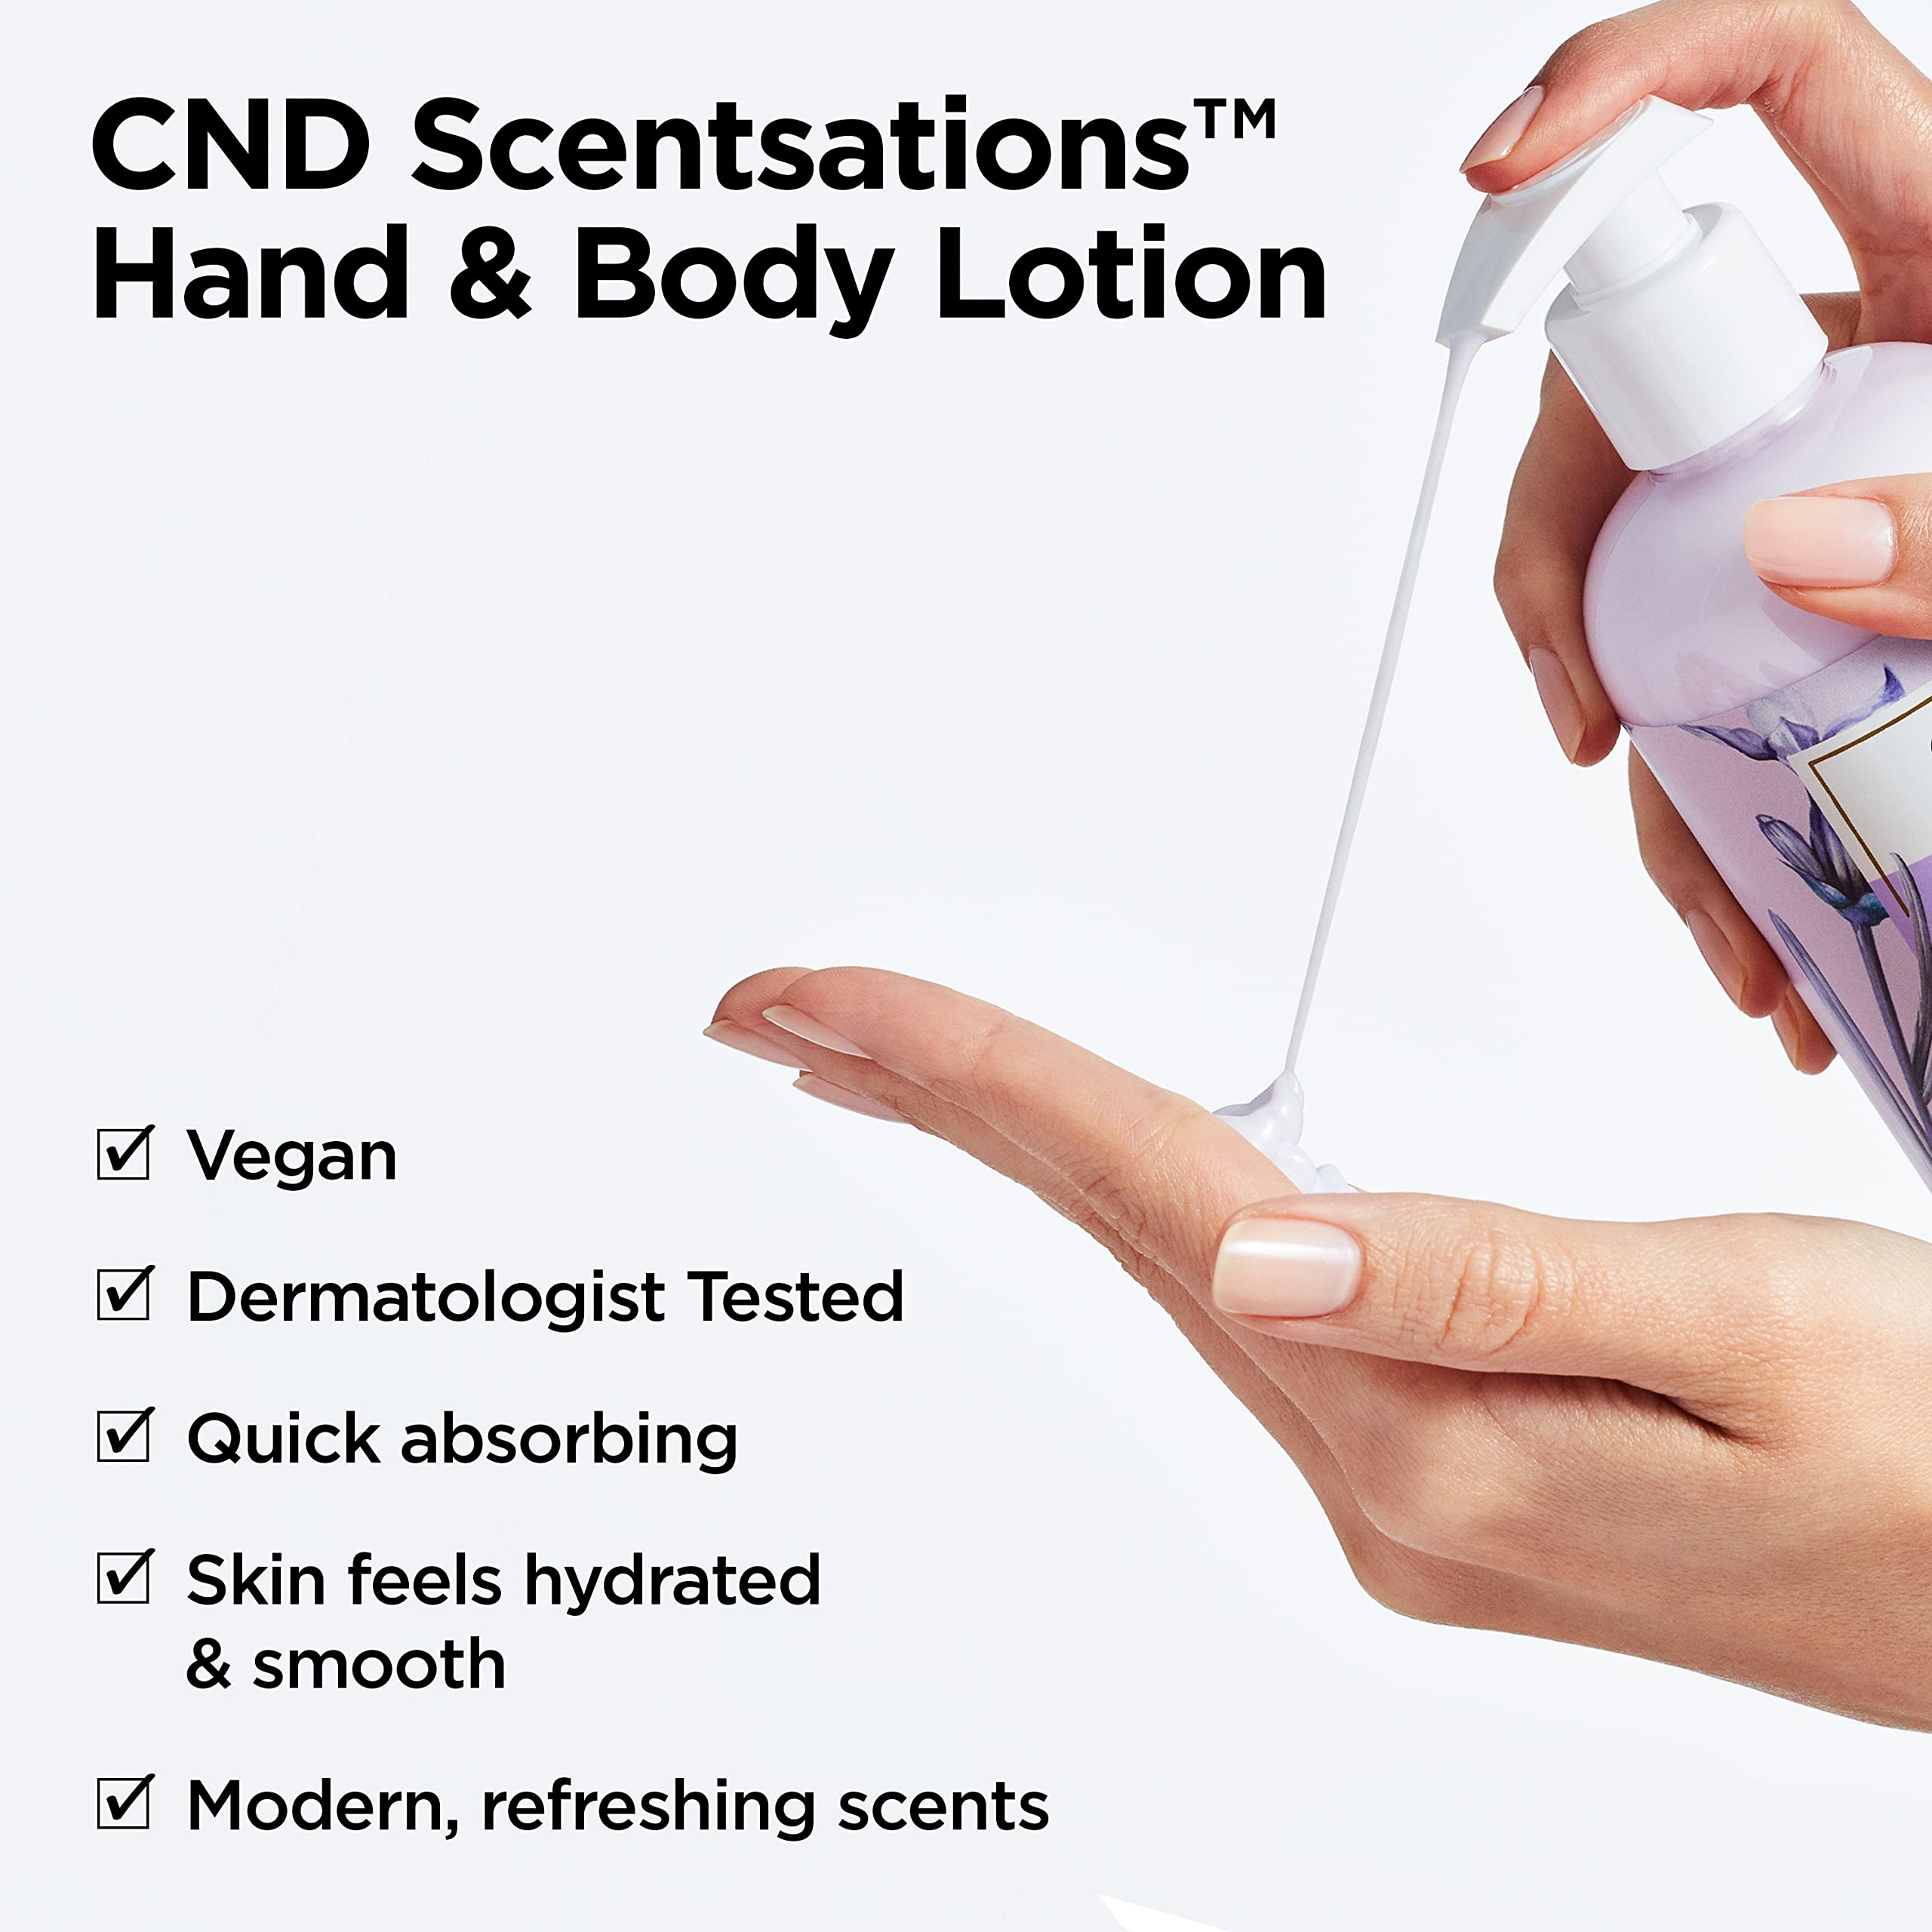 CND Scentsations Hydrating Hand & Body Lotion, Nice Scented Lotion for Dry Skin, Moisturizing Formula for Healthier, Softer Skin, 8.3 Fl Oz